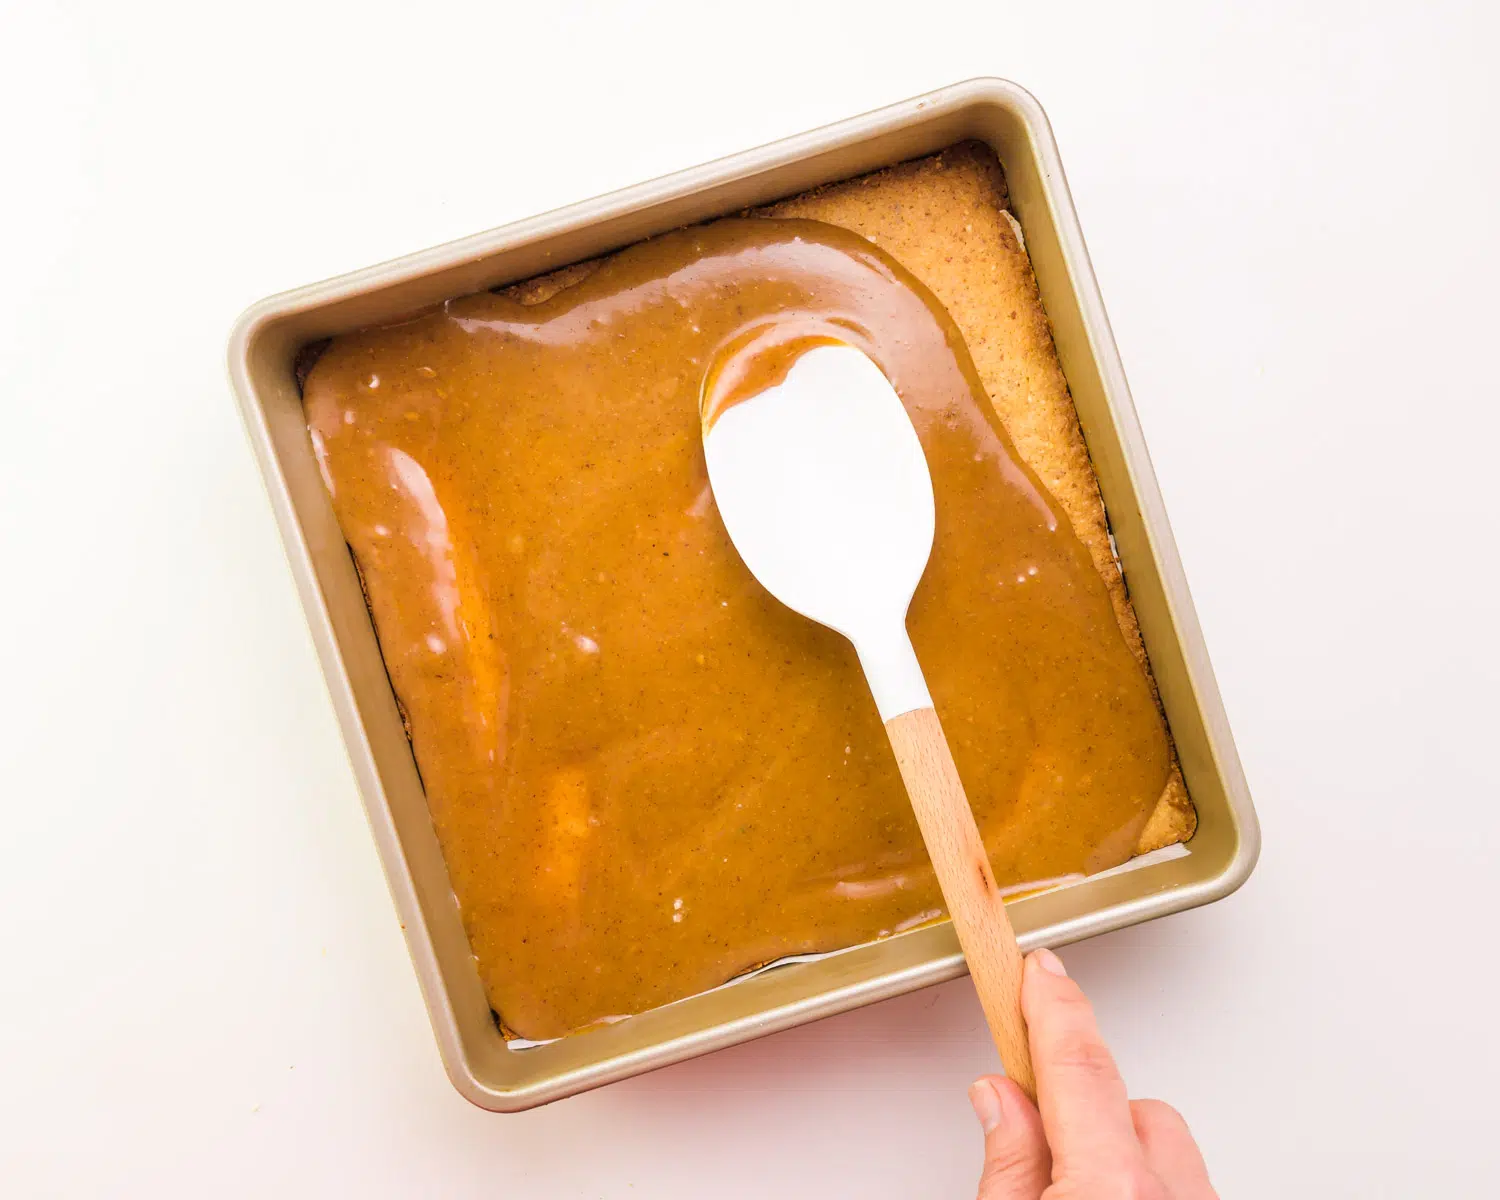 A spatula spreads caramel around in a pan.